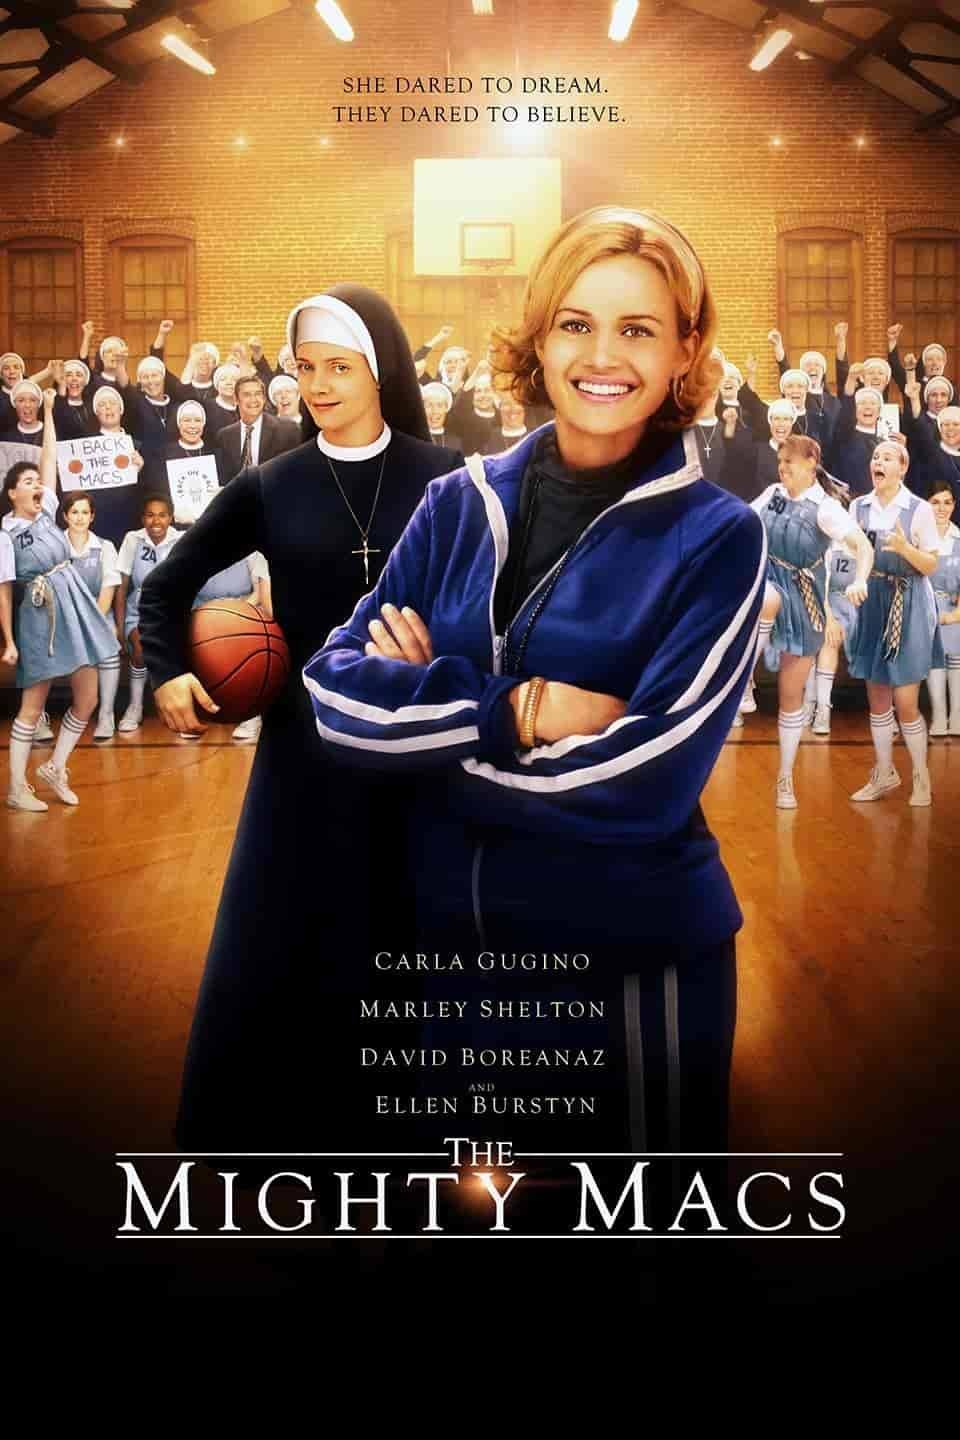 The Mighty Macs (2009) Movie Poster